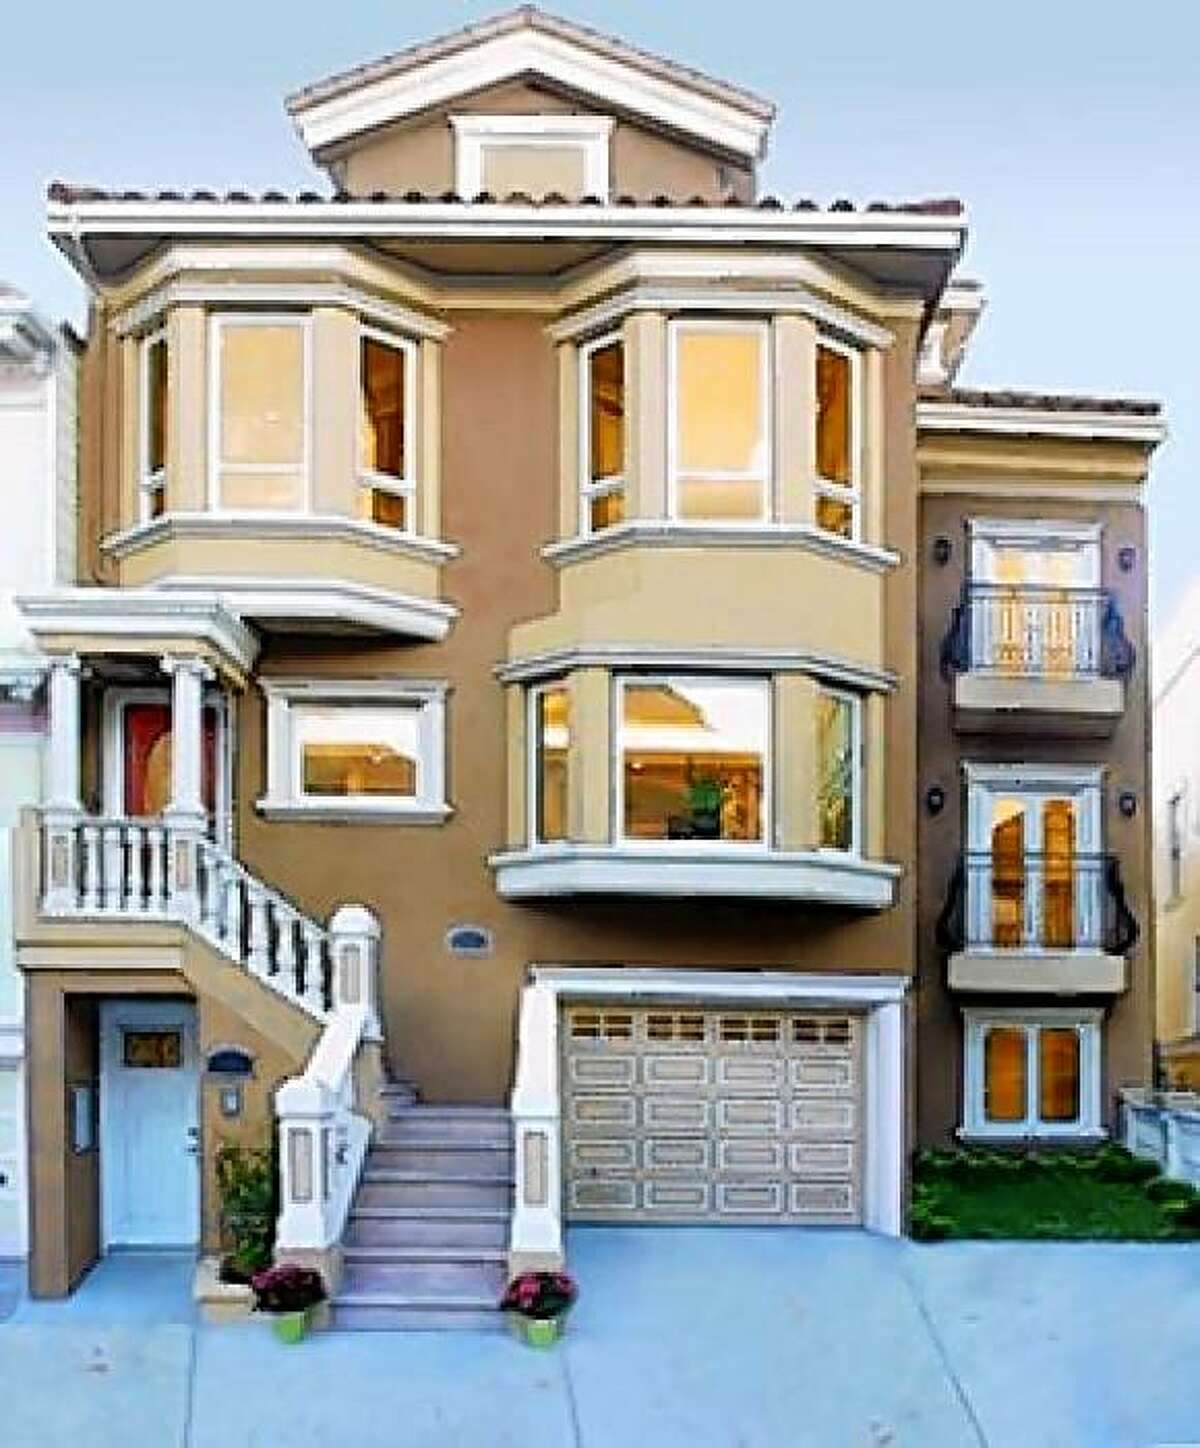 San Francisco Edwardian: This 4,200-quare foot home in the Inner Sunset was the grand prize in a raffle sponsored by the Yerba Buena Center for the Arts. The winner chose $1.8 million instead and the home is back on the market for $2.1 million.